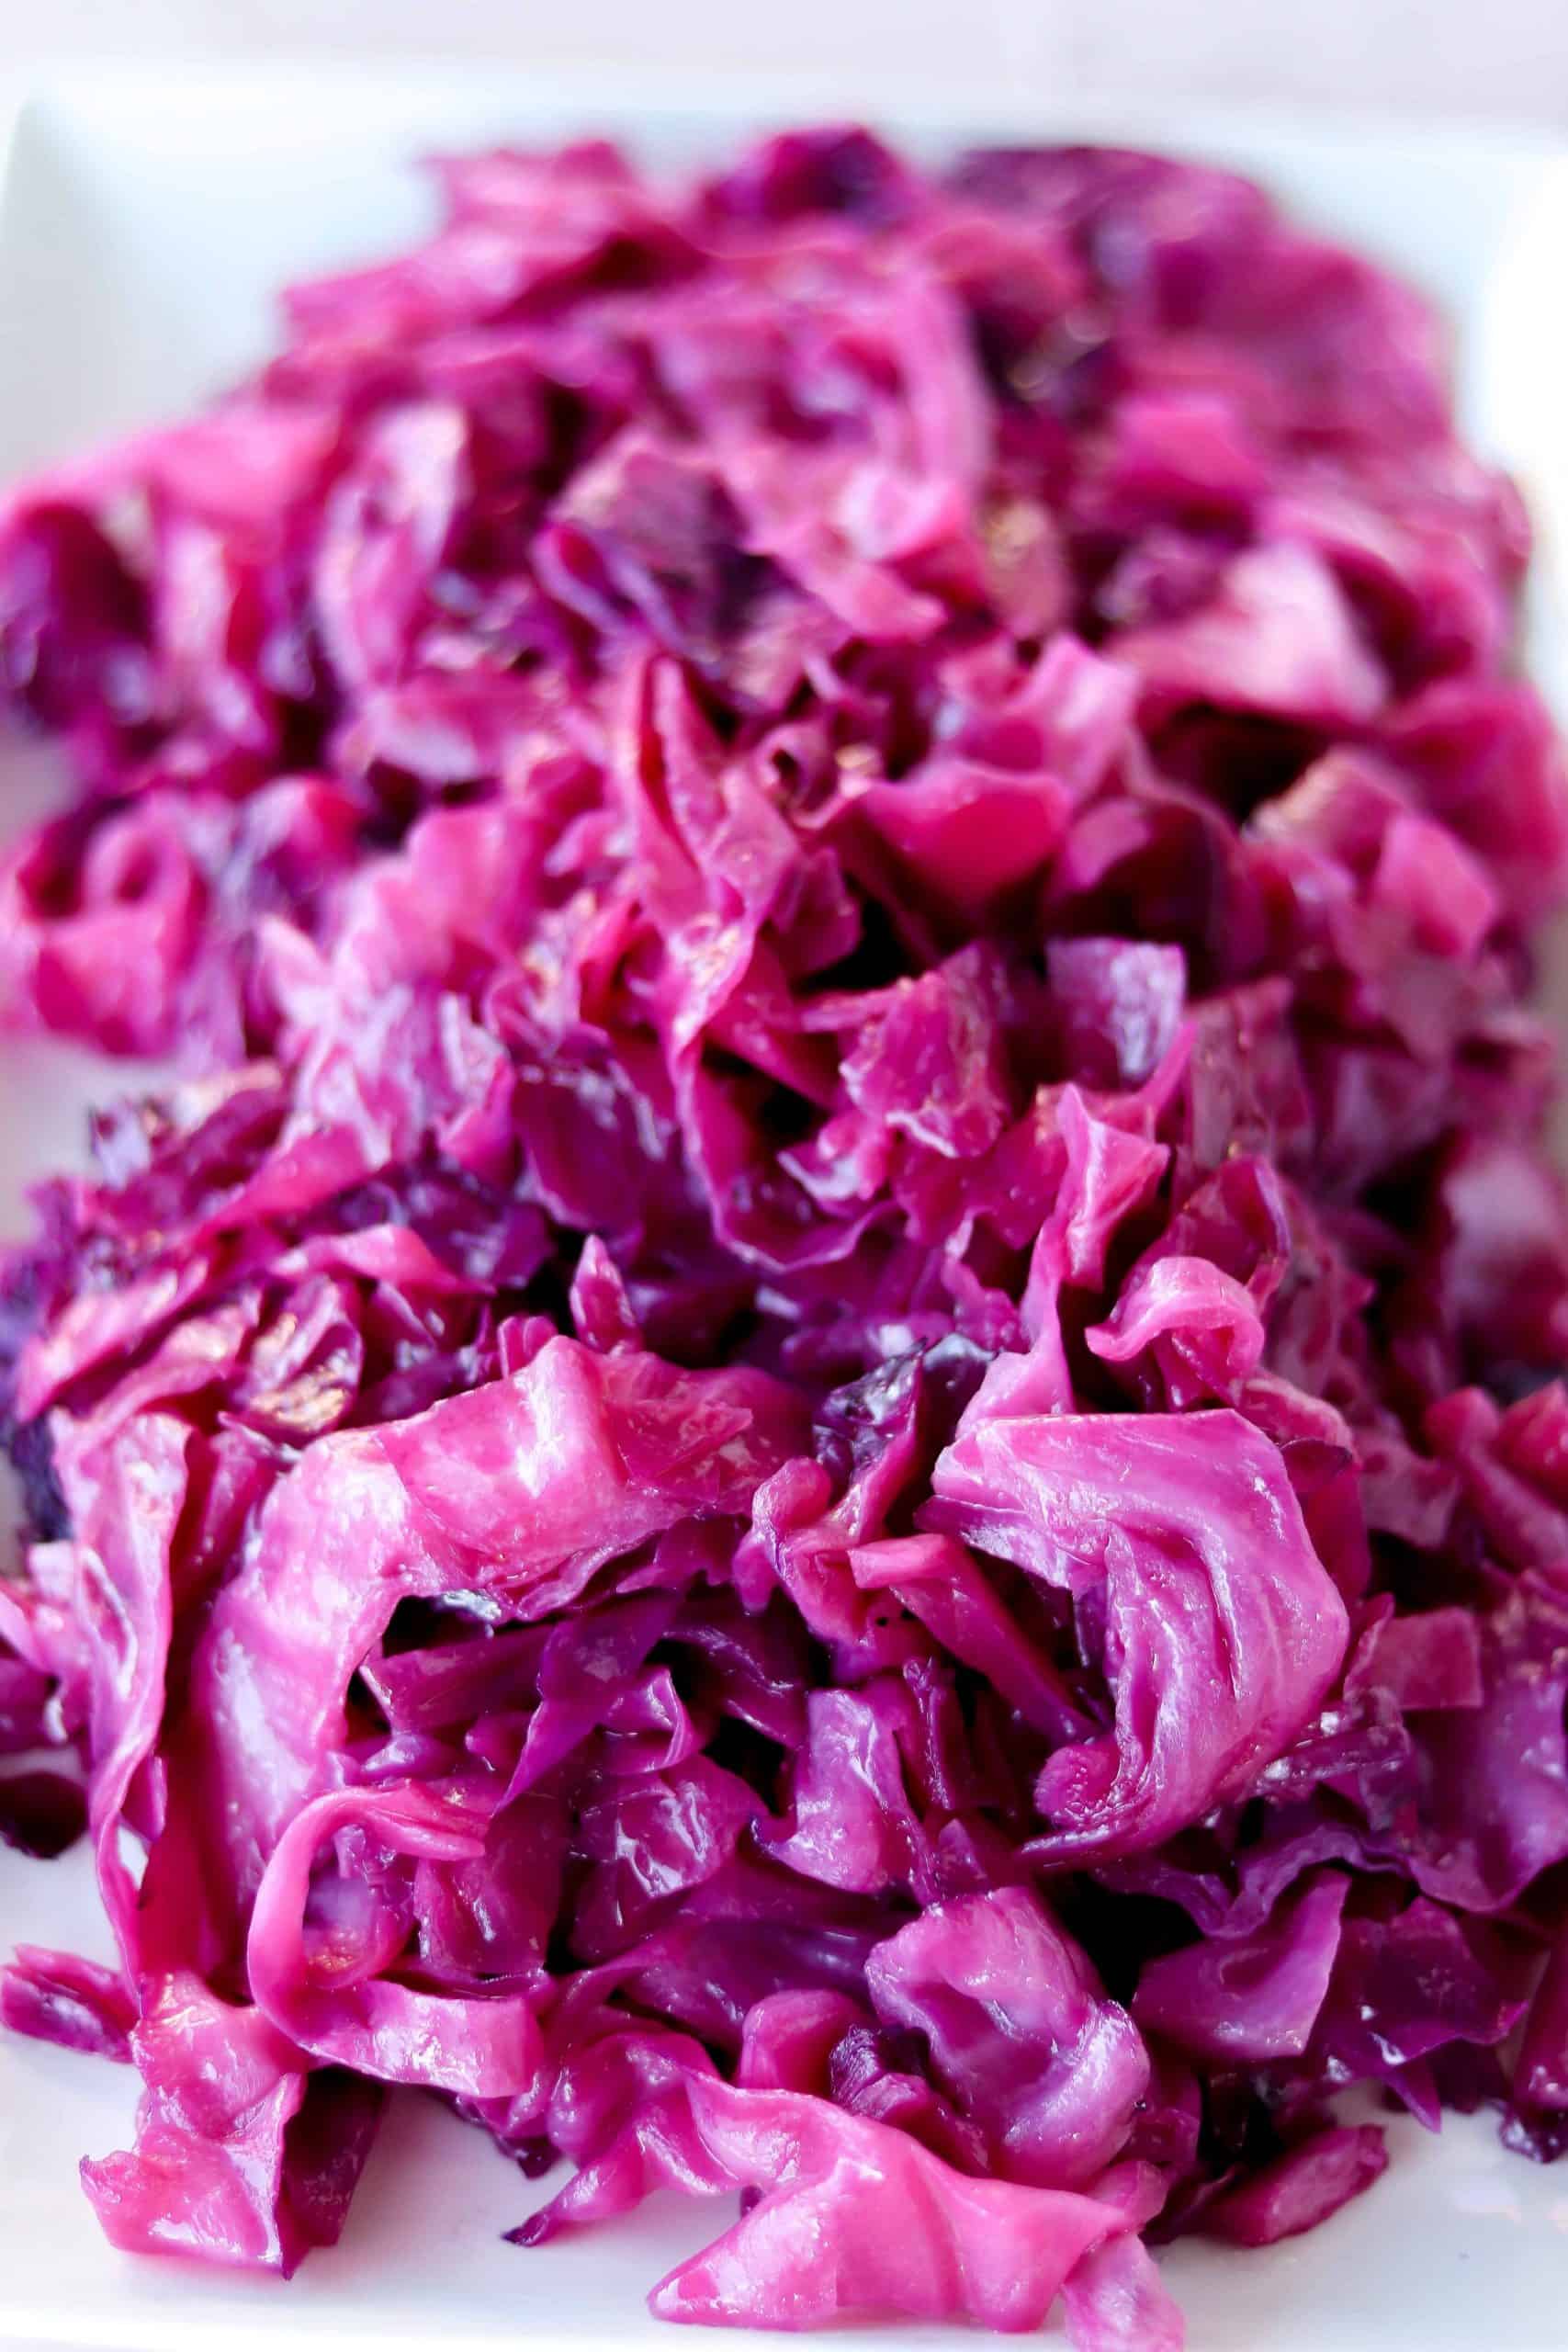 Sauteed Red Cabbage - Whipped It Up